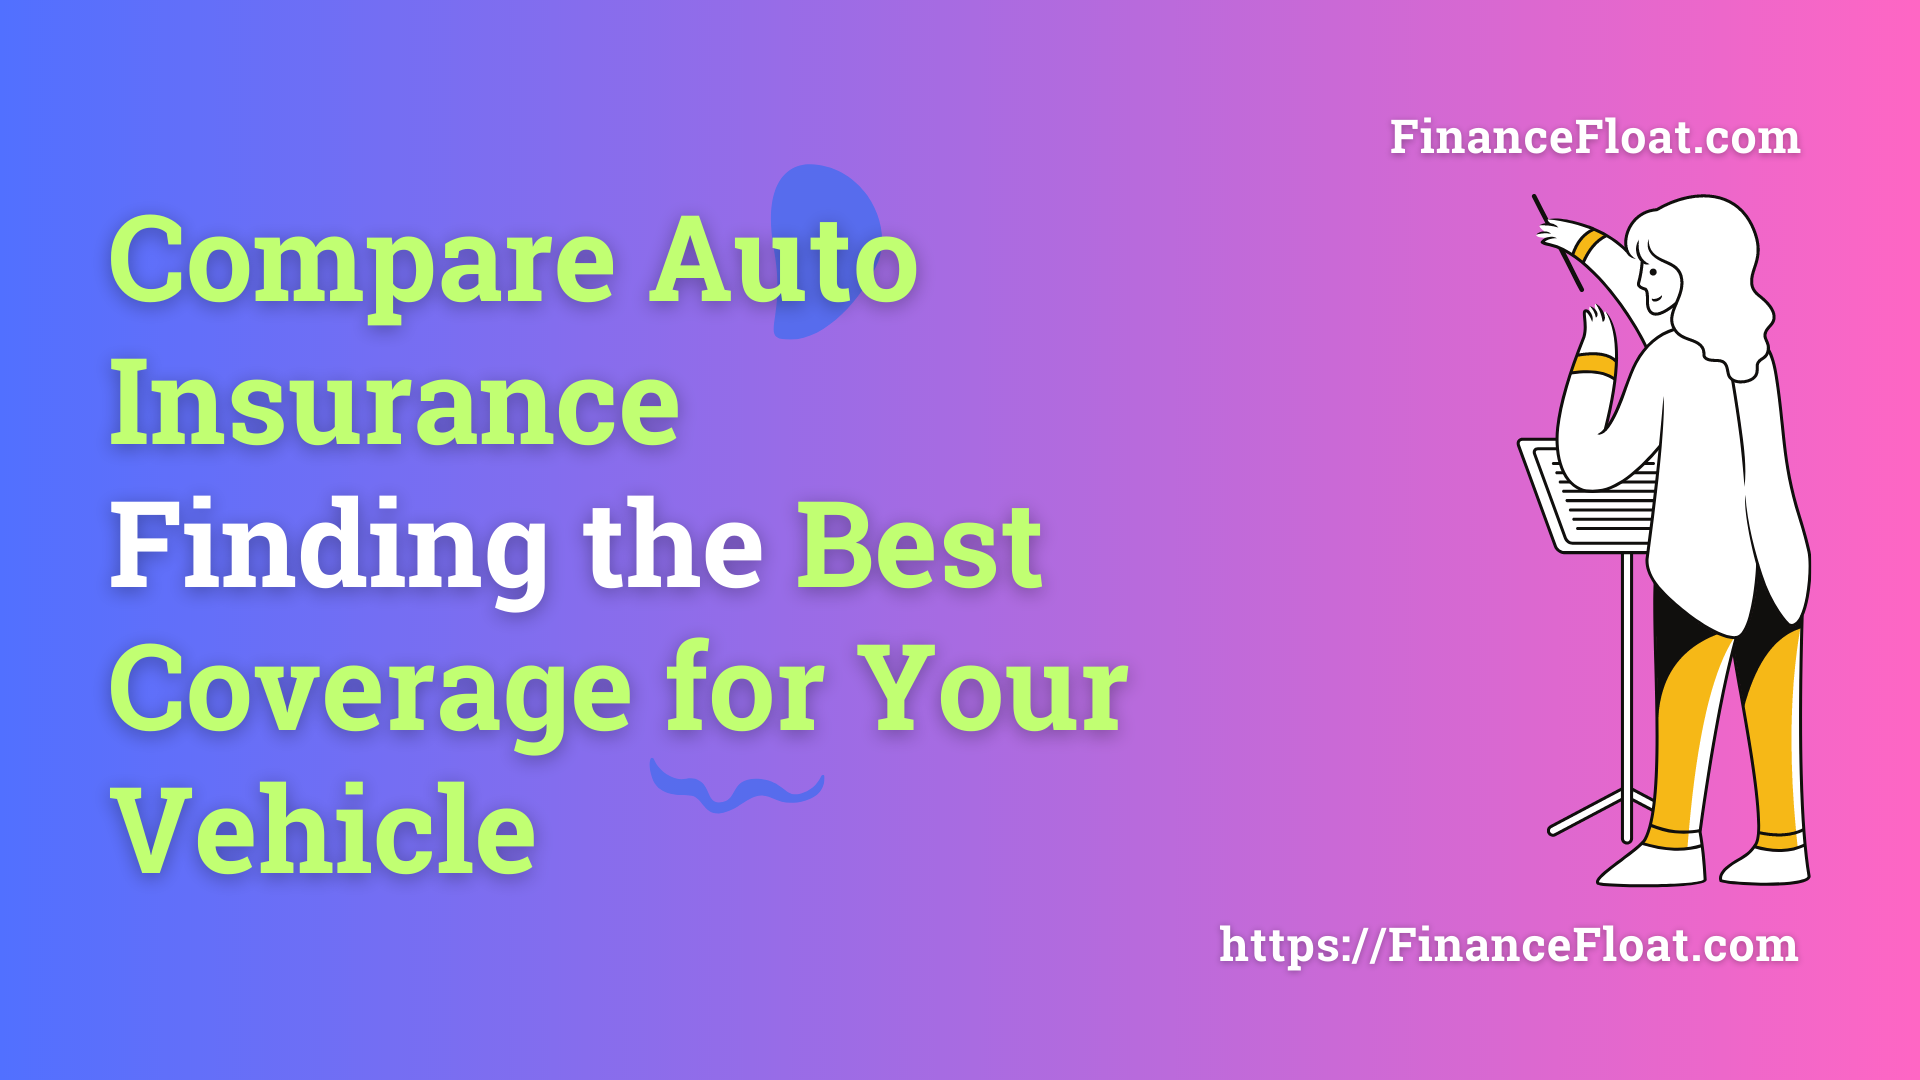 Compare Auto Insurance Finding the Best Coverage for Your Vehicle.